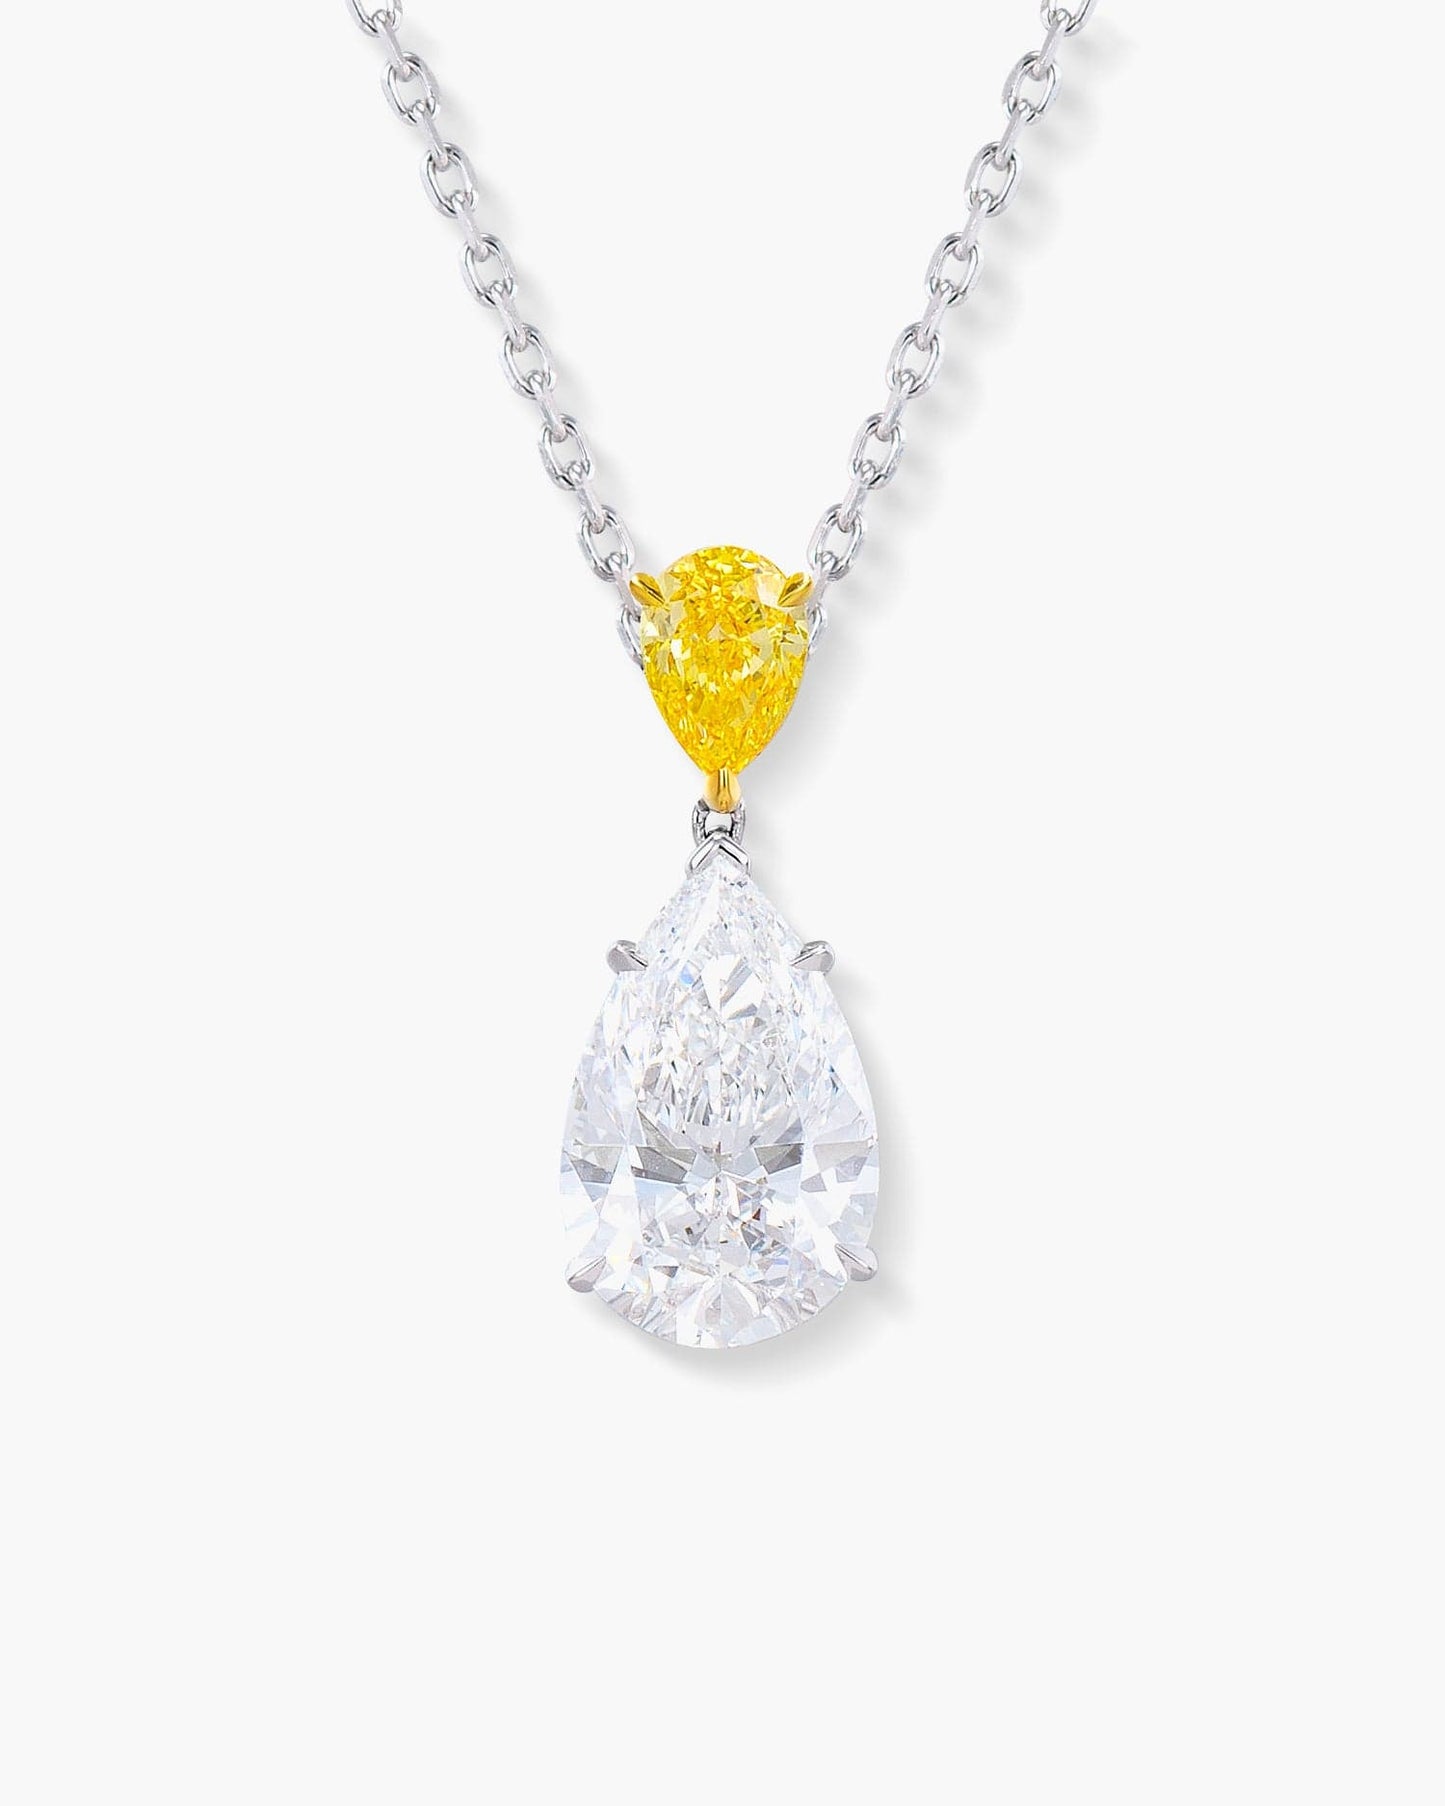 2.02 carat Pear Shape White and Yellow Diamond Pendant Necklace